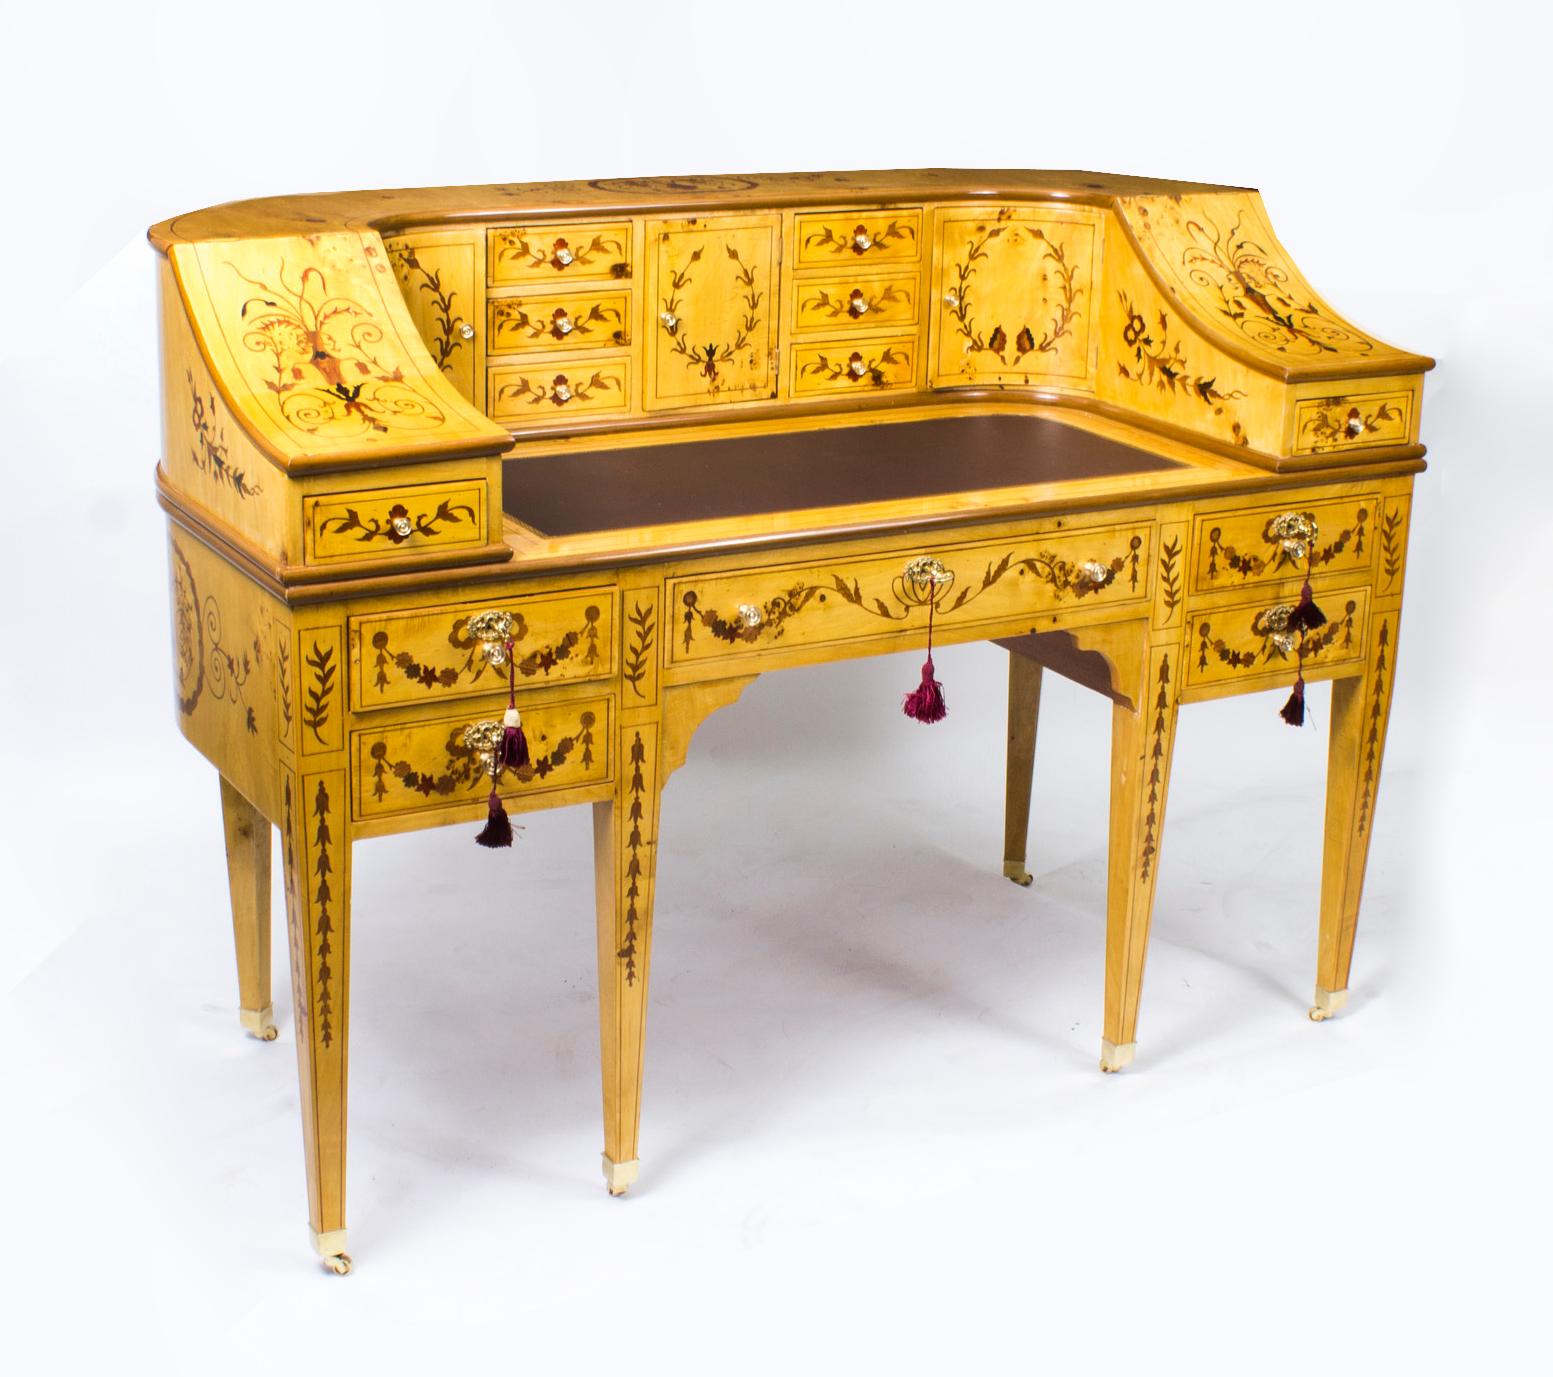 Here we have a very attractive Carlton House Desk which has been hand crafted from the very finest satinwood and decorated with inlaid marquetry and dates from the late twentieth century.
The ornate and fascinating marquetry work includes floral